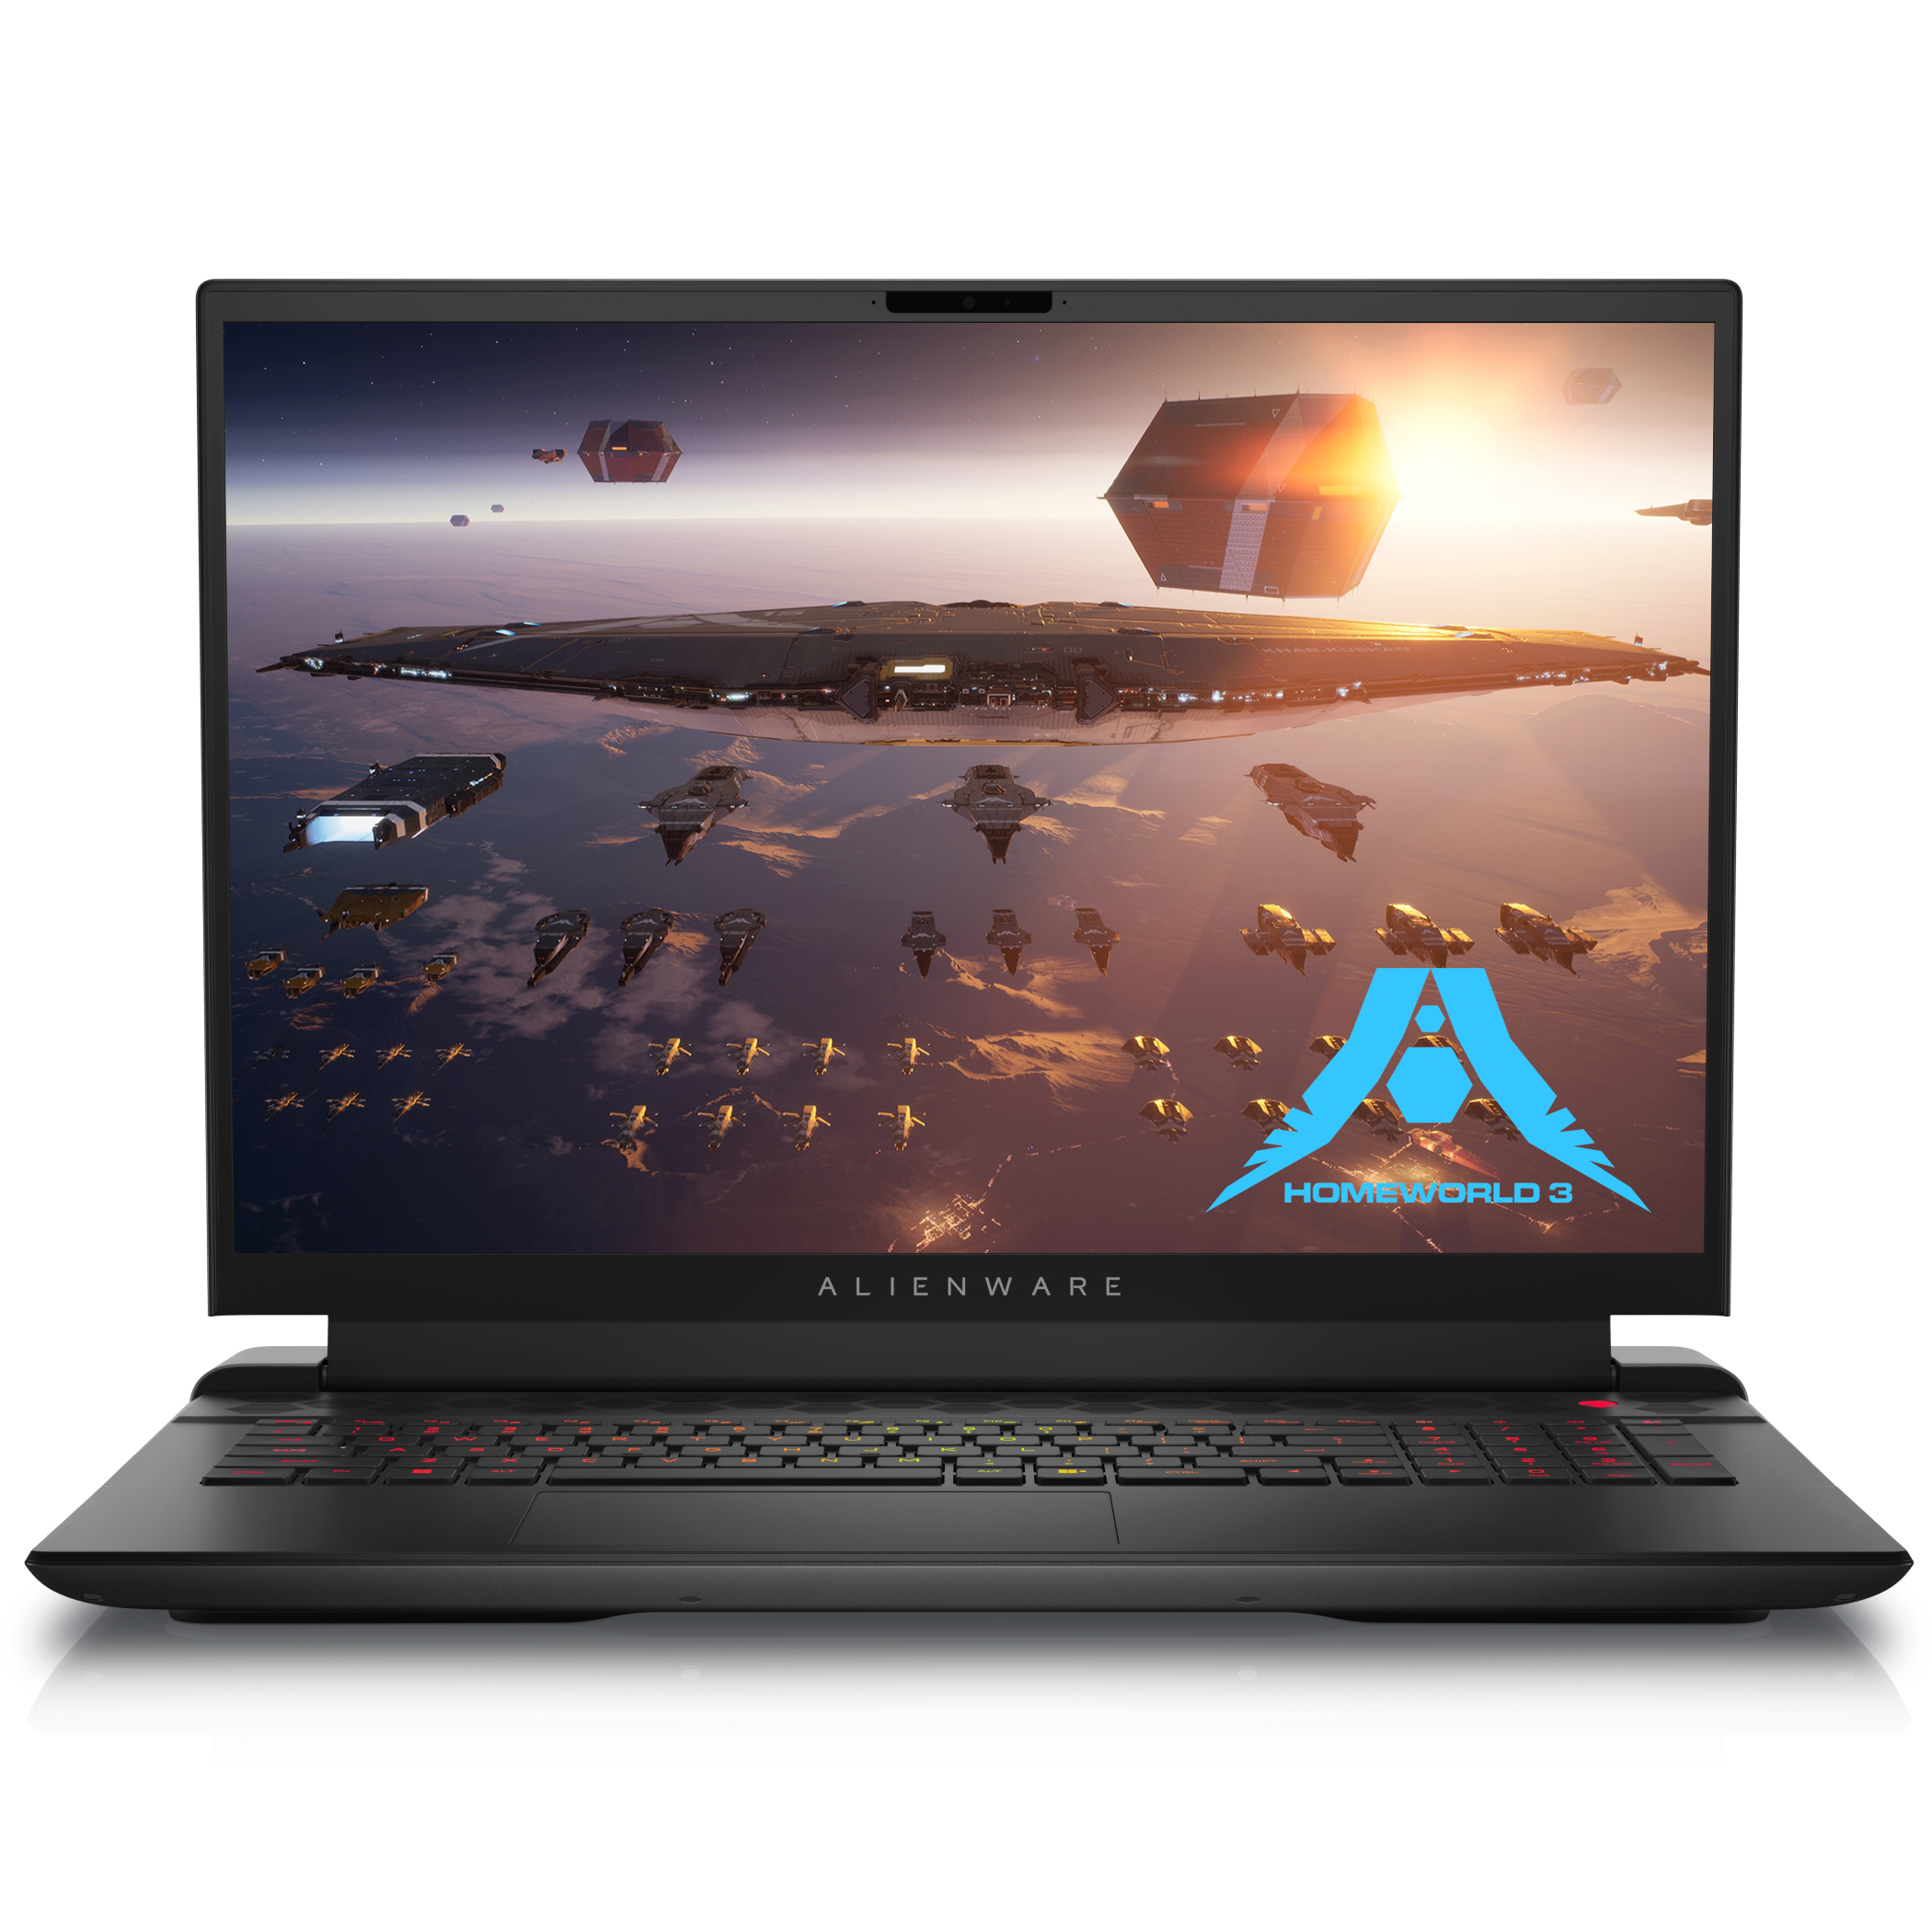 Front view of the Alienware m18 laptop